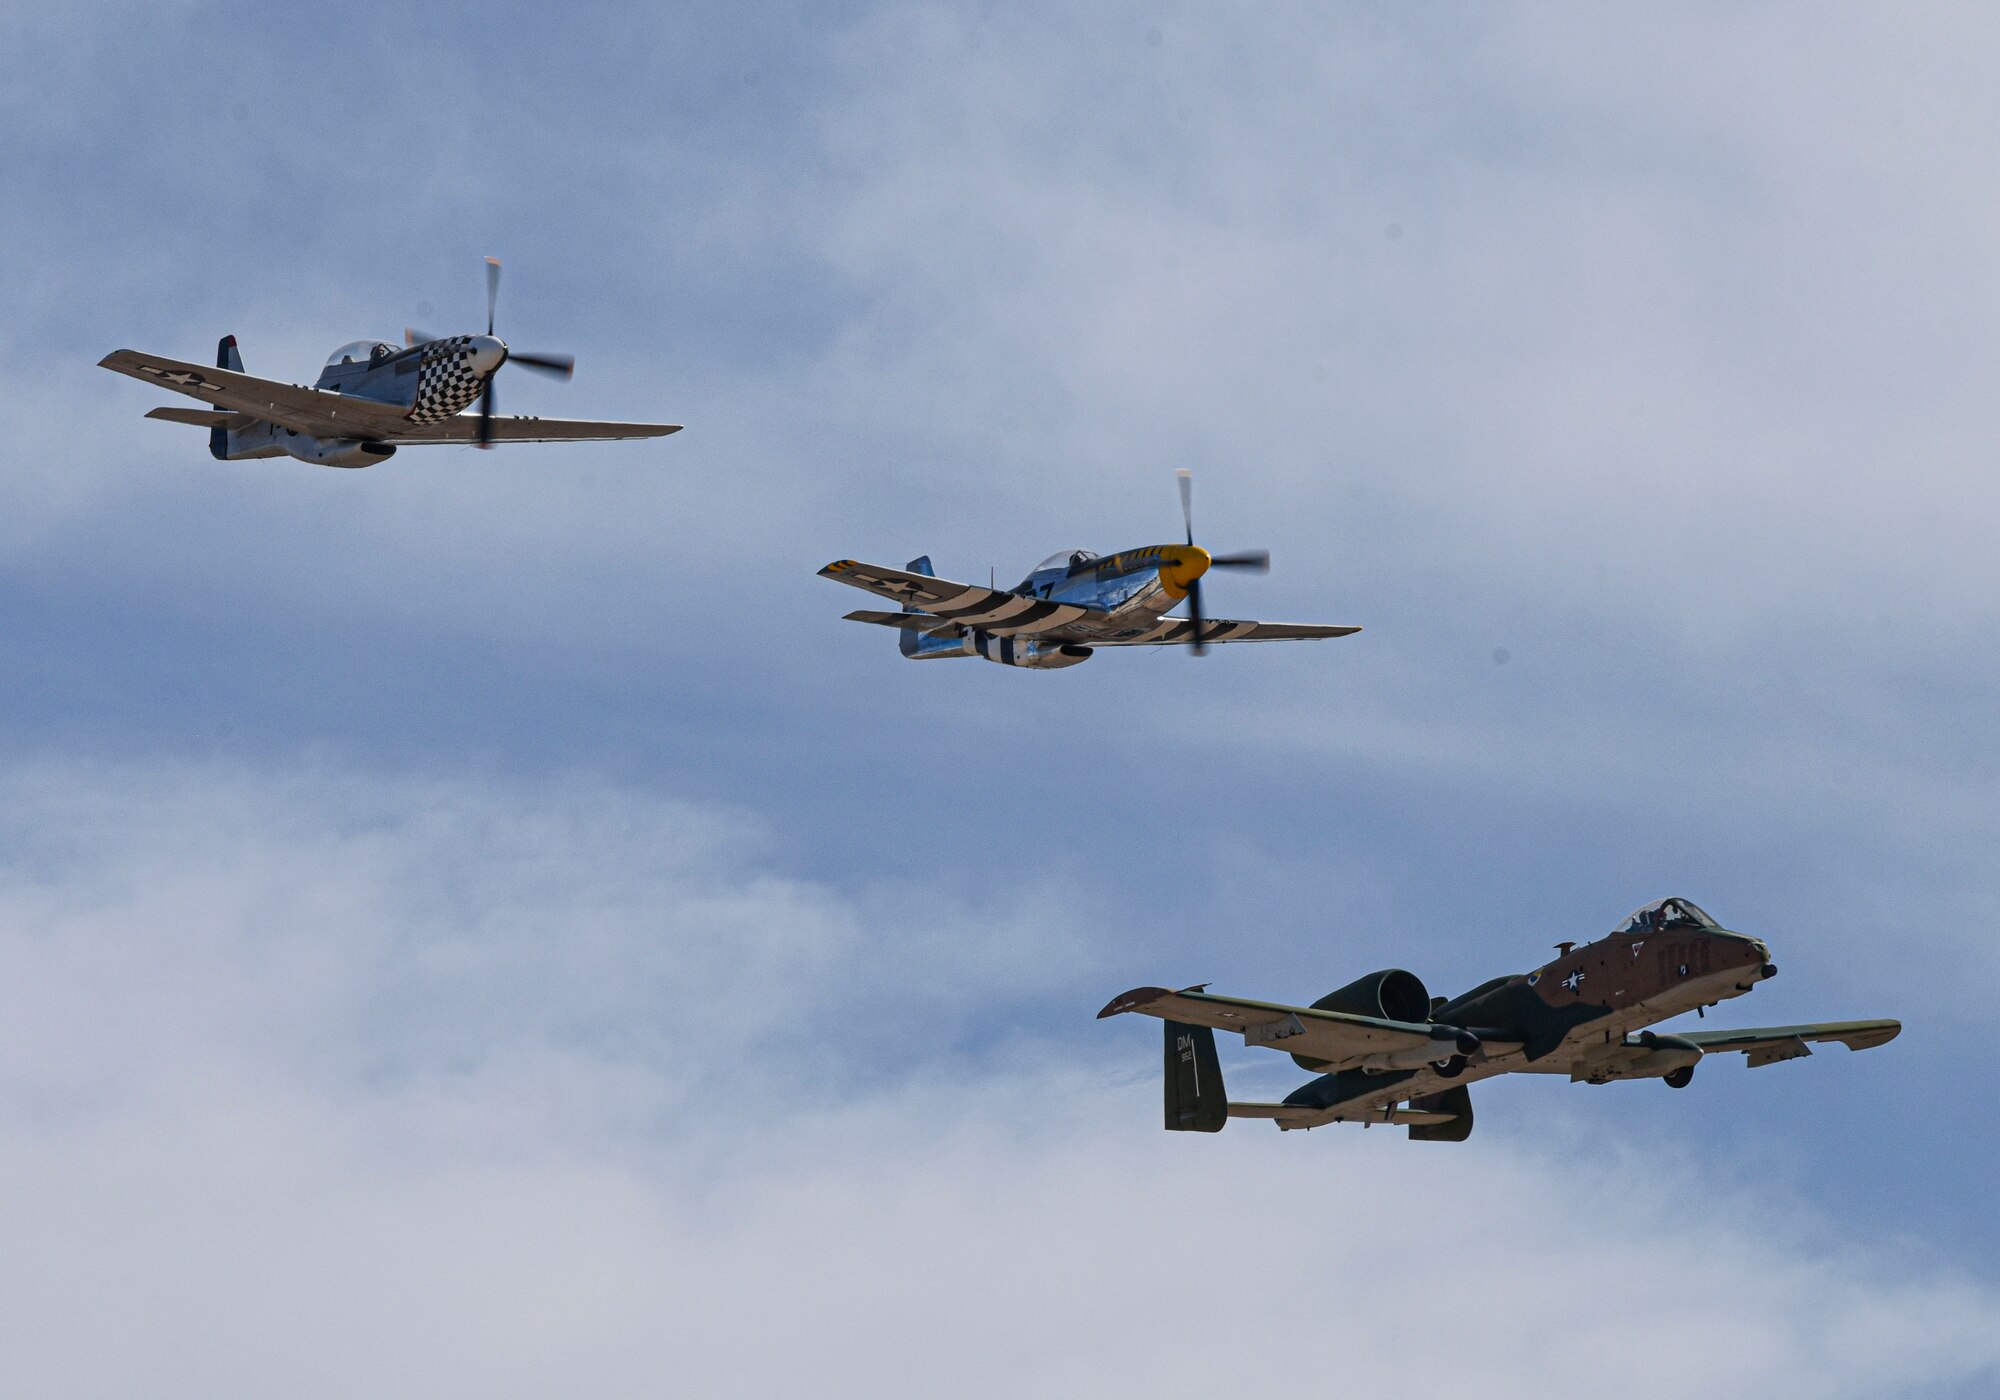 Two P-51 Mustangs and an A-10 flying next to each other.